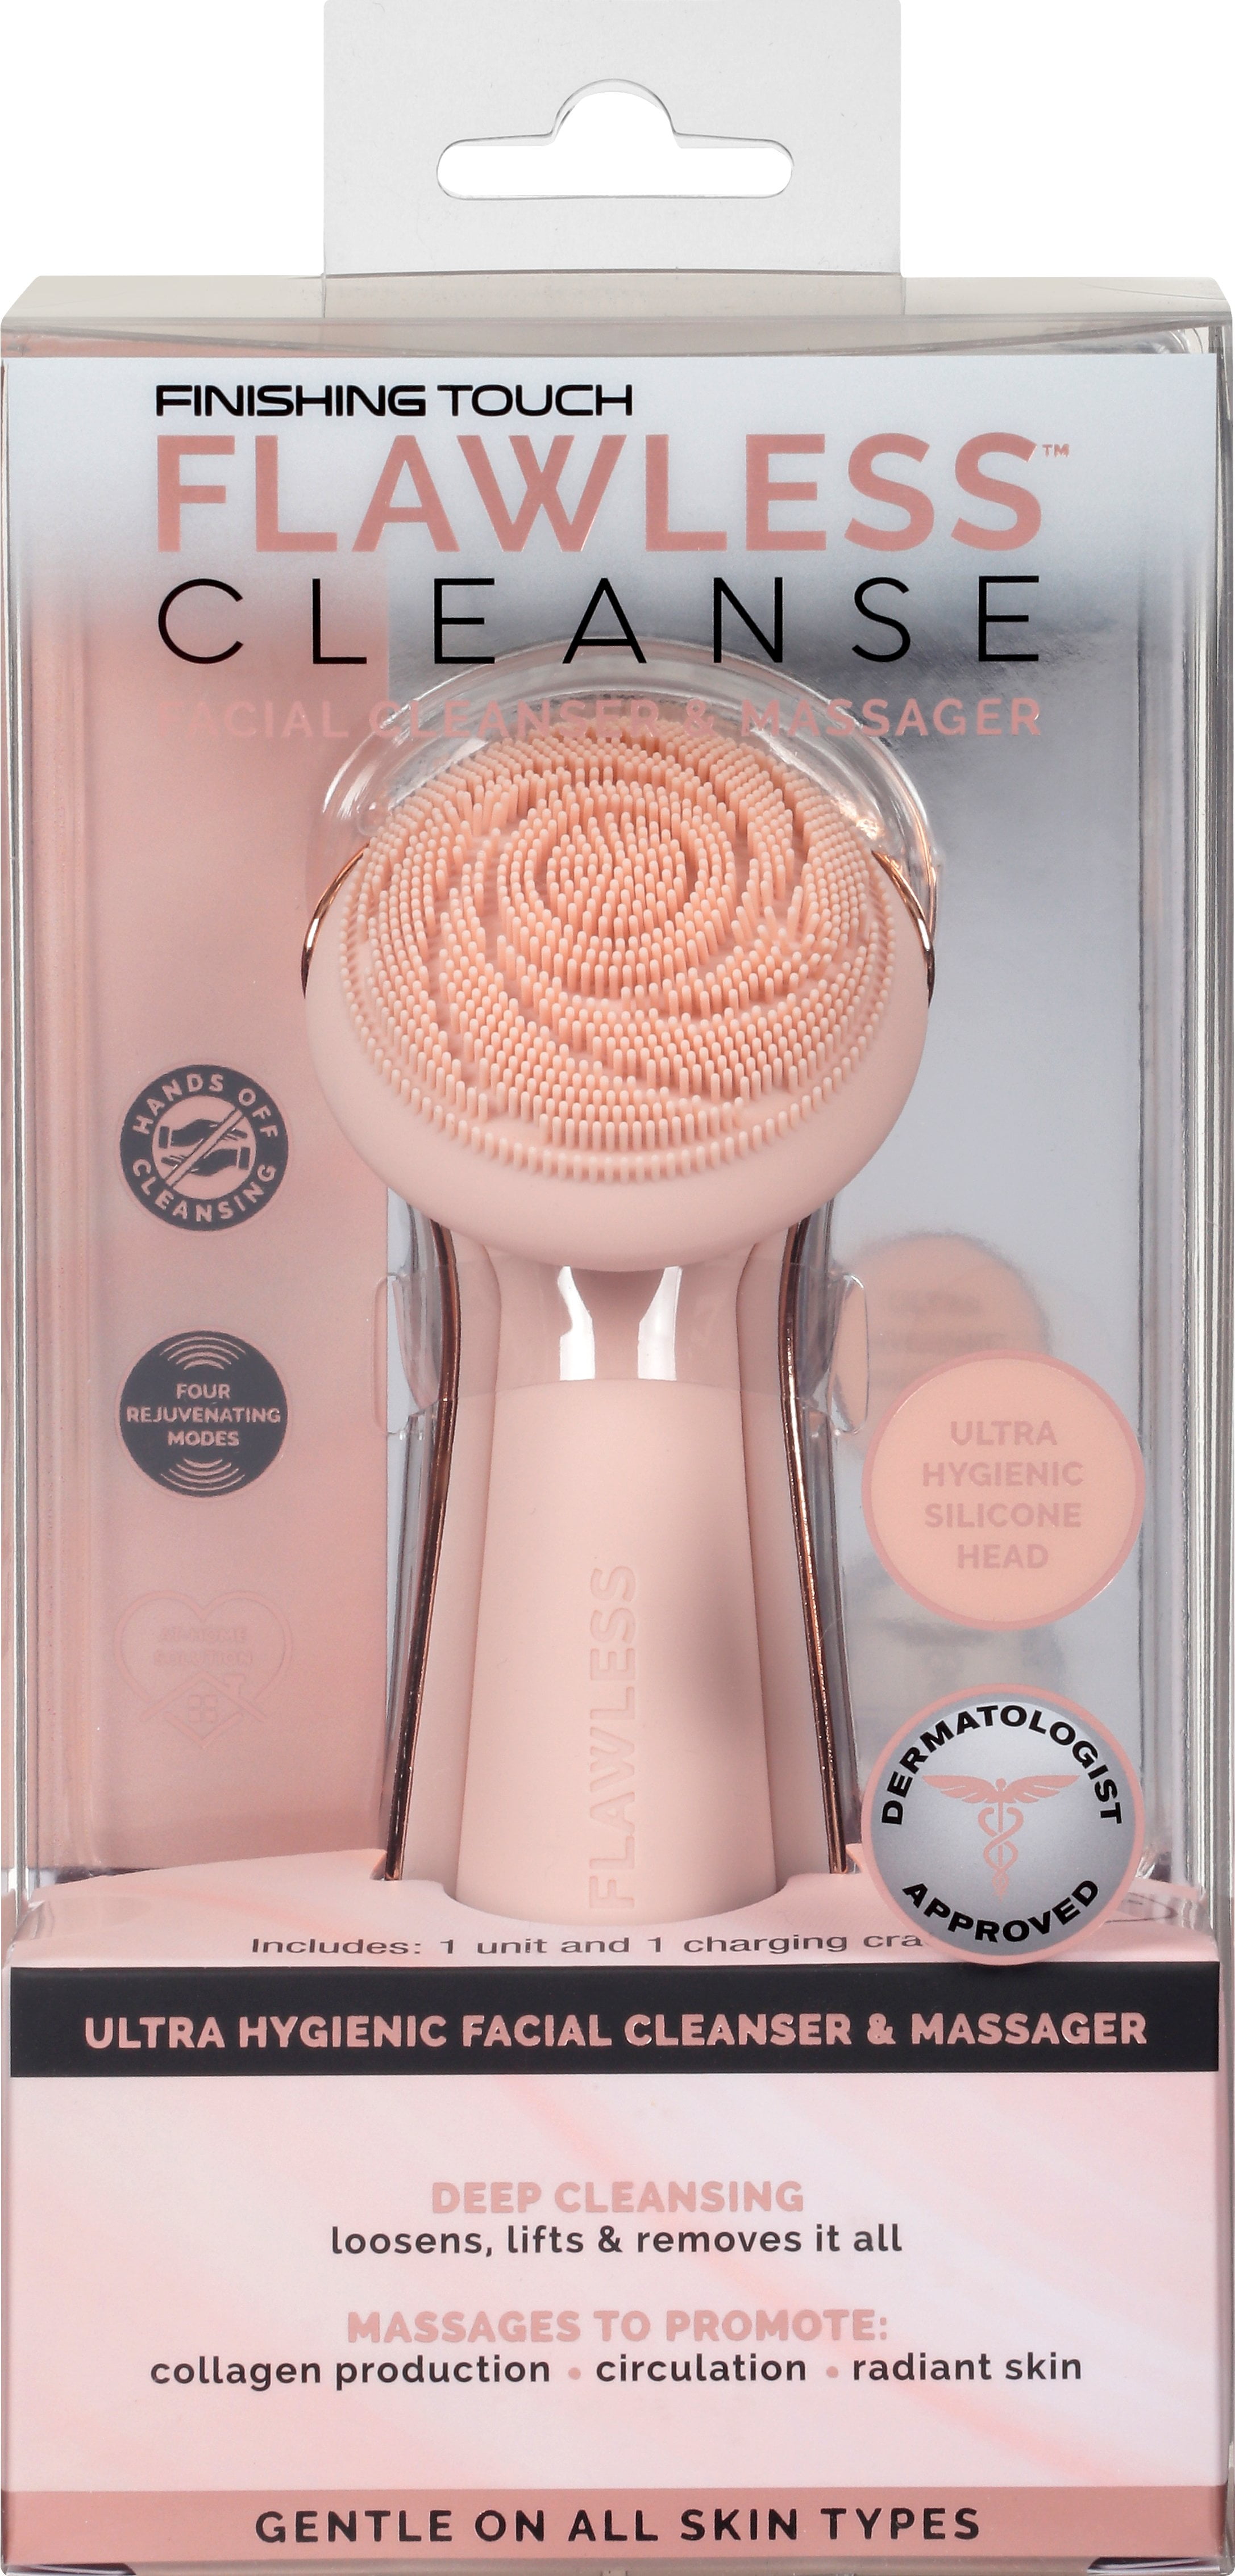 Finishing Touch Flawless Cleanse Silicone Facial Scrubber and Cleanser